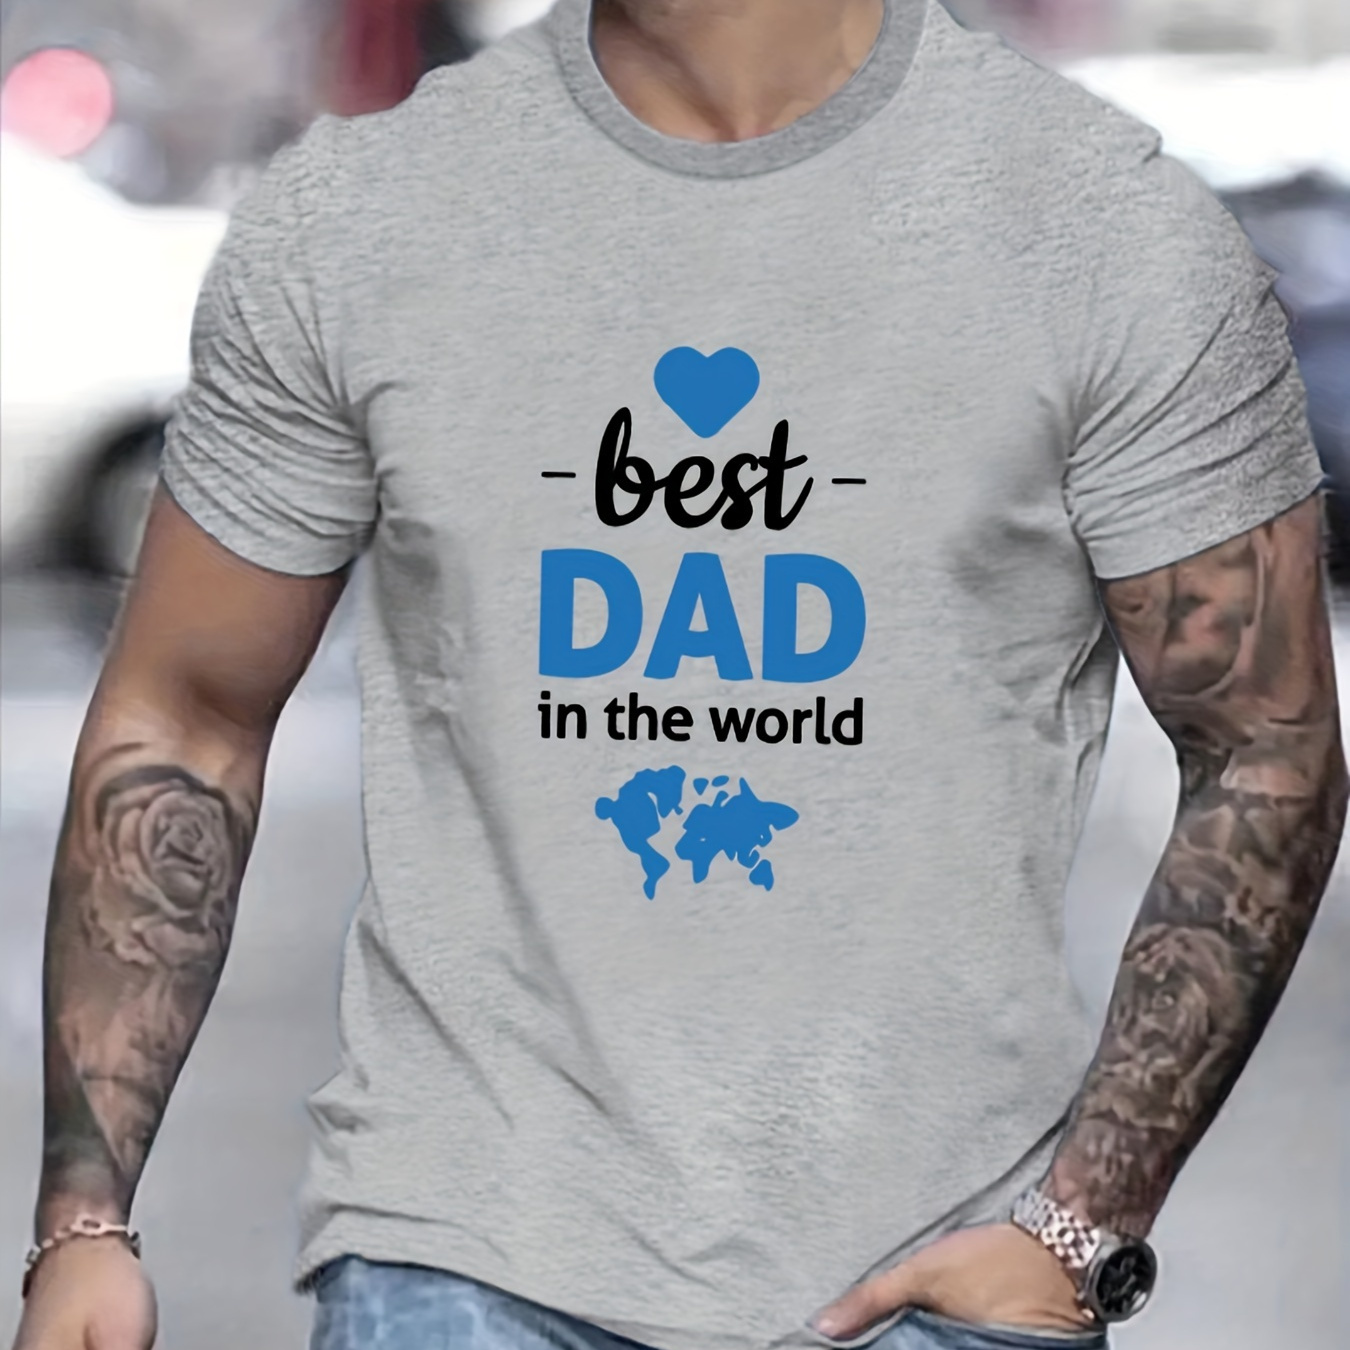 

Best Dad In The World Print, Men's Novel Graphic Design T-shirt, Casual Comfy Tees For Summer, Men's Clothing Tops For Daily Activities